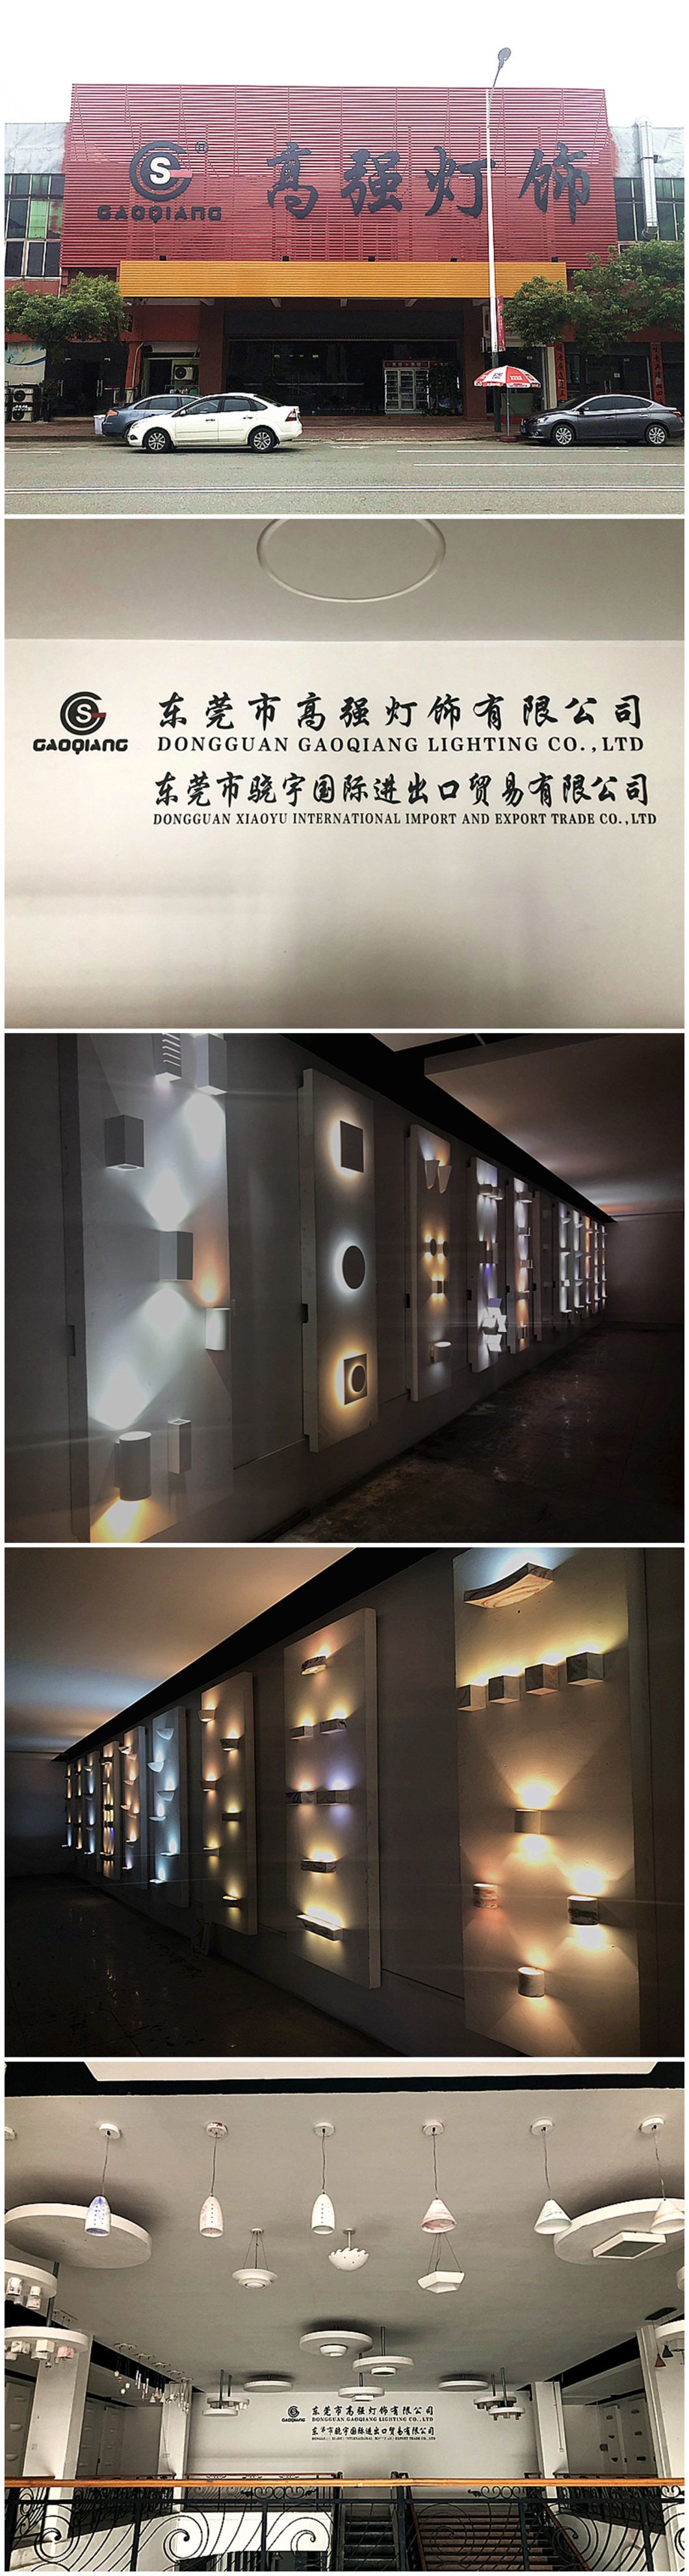 Hot Sale Square White LED Down Light Ceiling Lamp Gqd4008